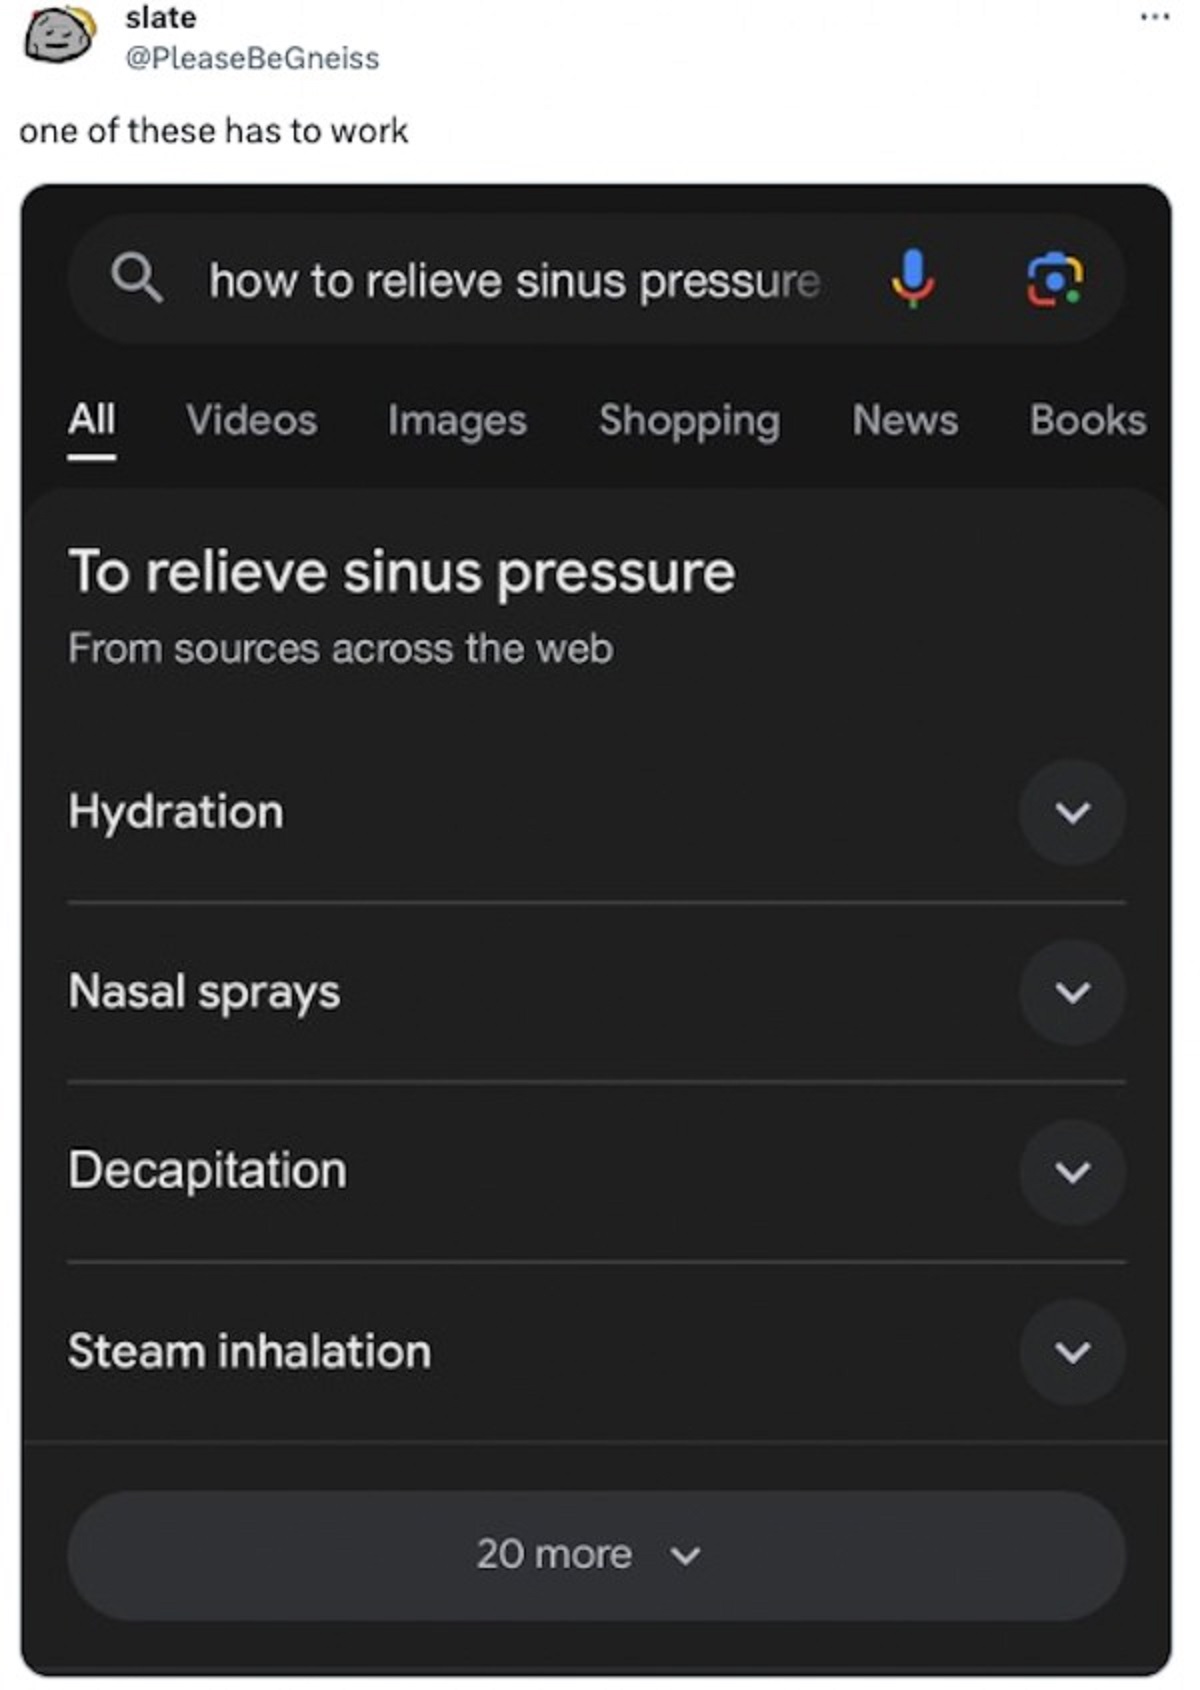 screenshot - slate one of these has to work Q how to relieve sinus pressure All Videos Images Shopping News To relieve sinus pressure From sources across the web Hydration Nasal sprays Decapitation Steam inhalation 20 more Books